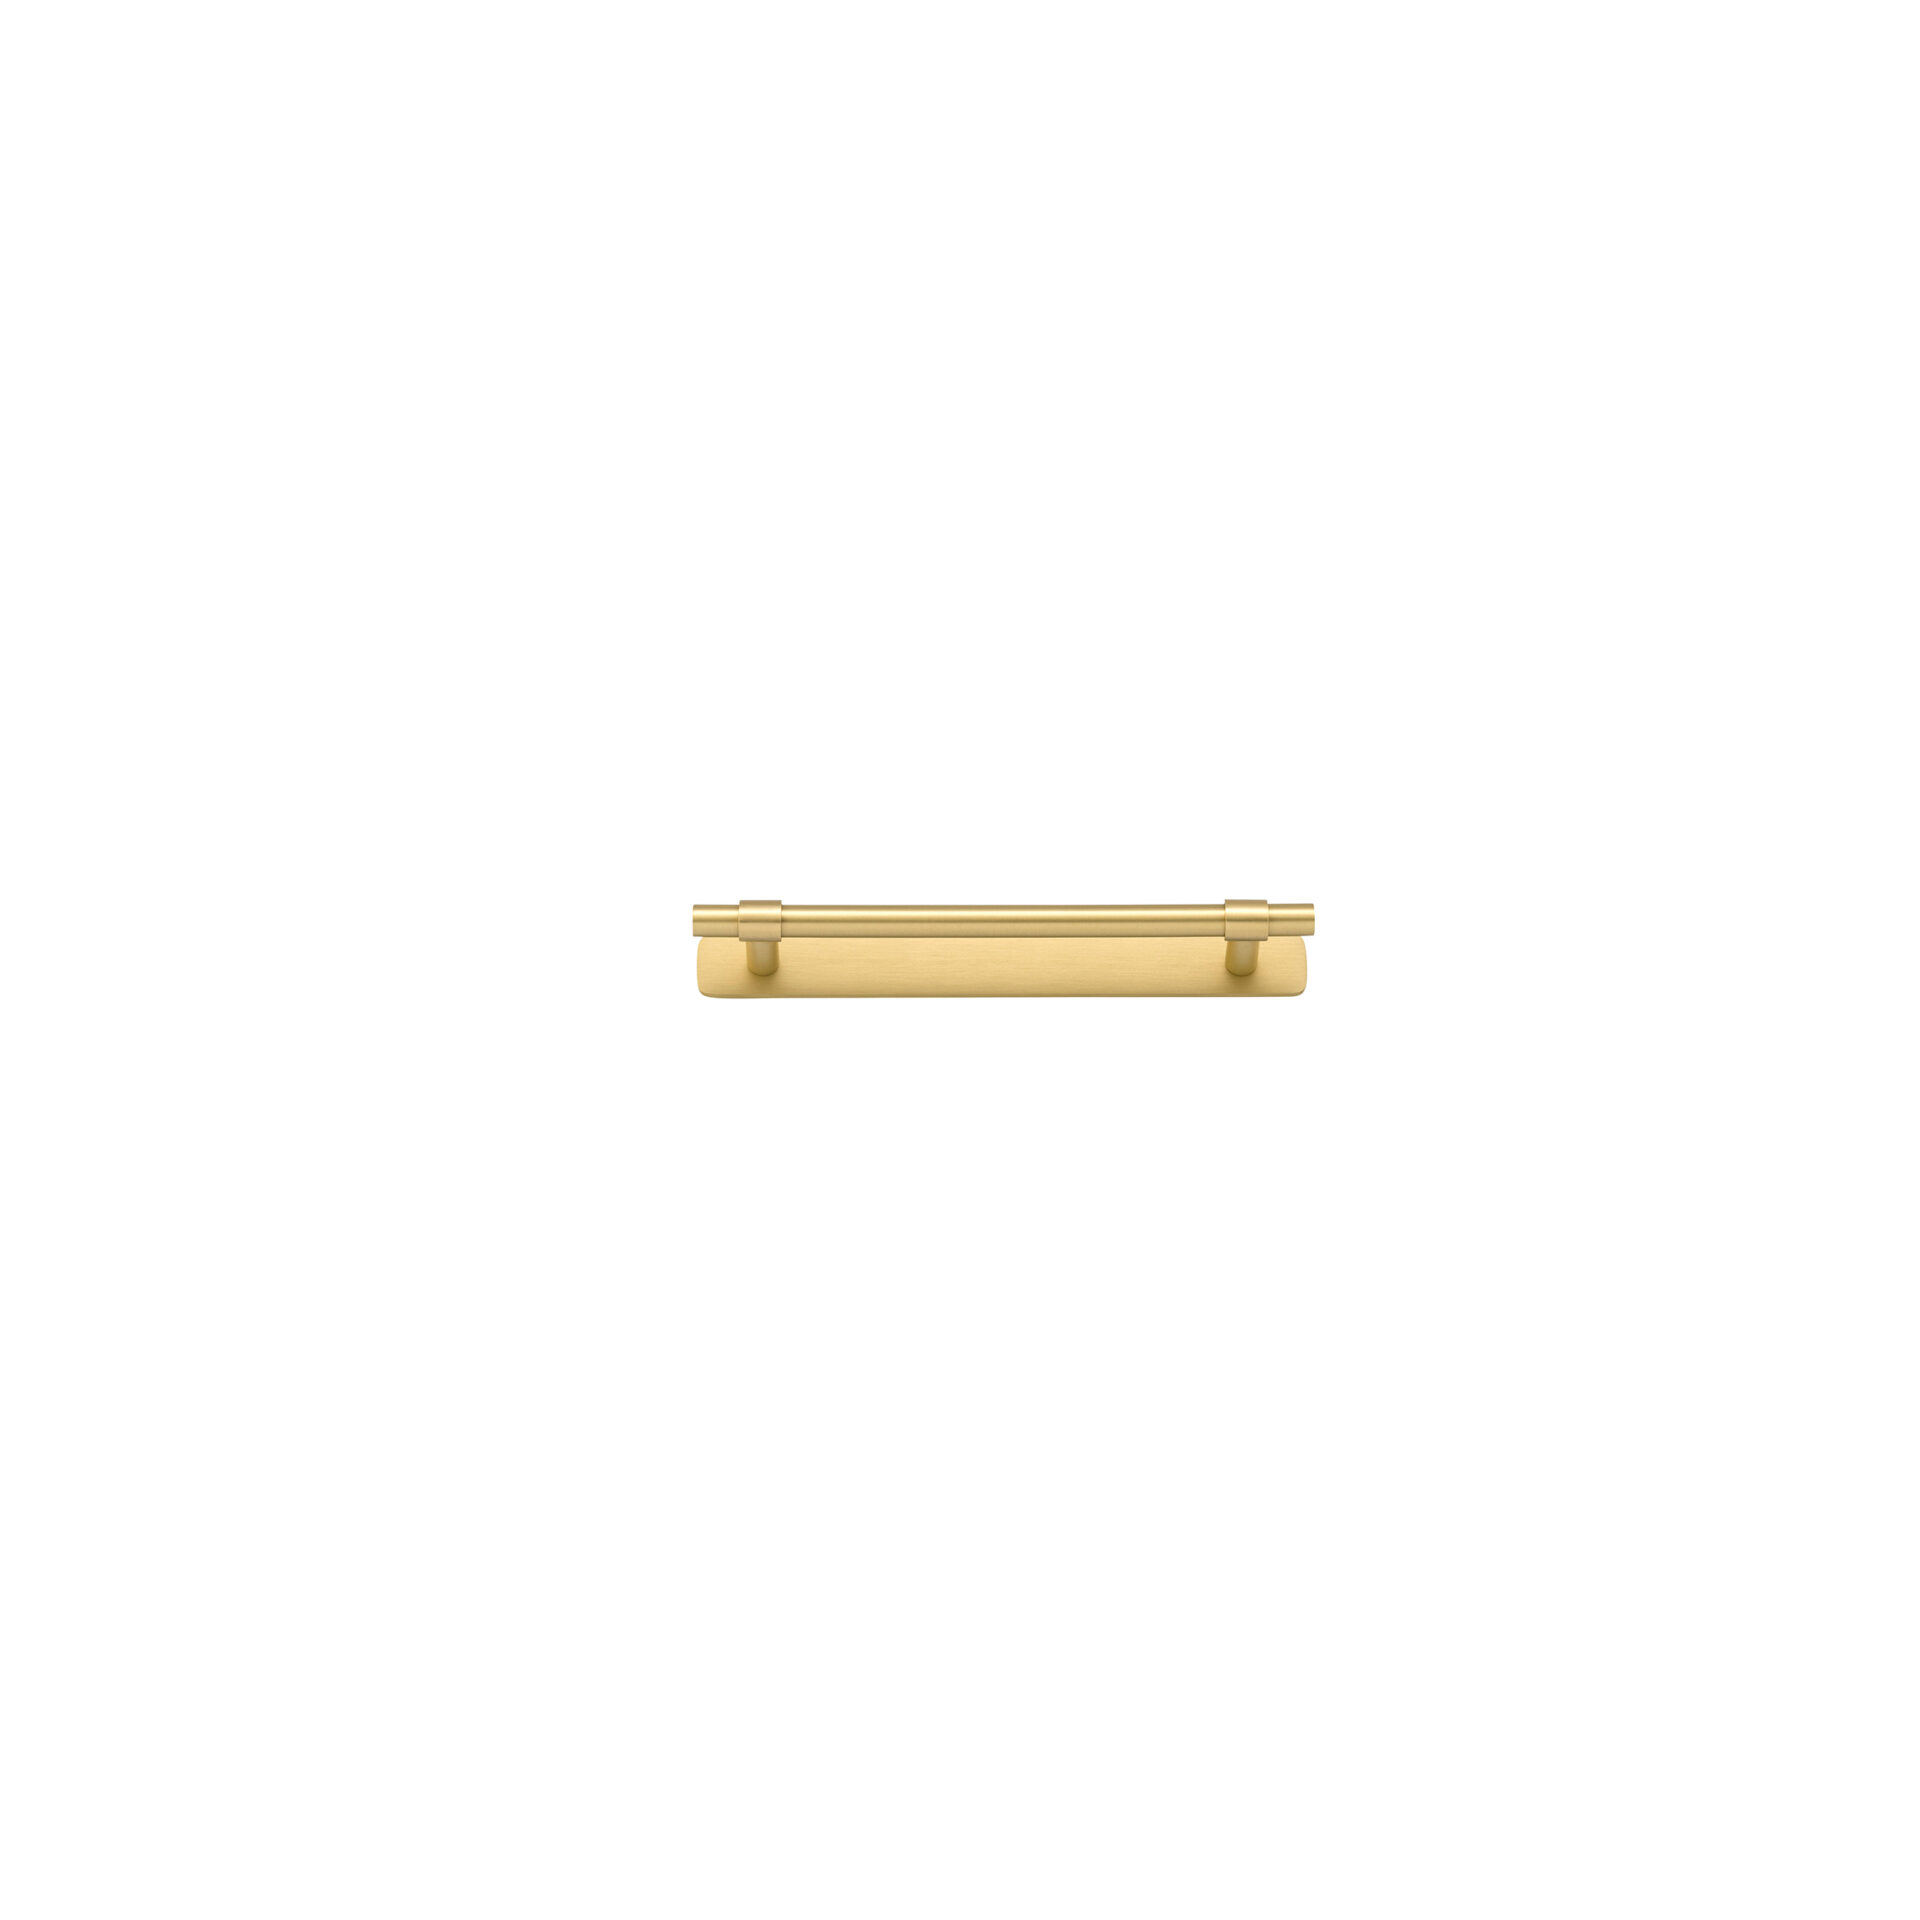 17153B - Helsinki Cabinet Pull with Backplate- CTC160mm - Brushed Gold PVD